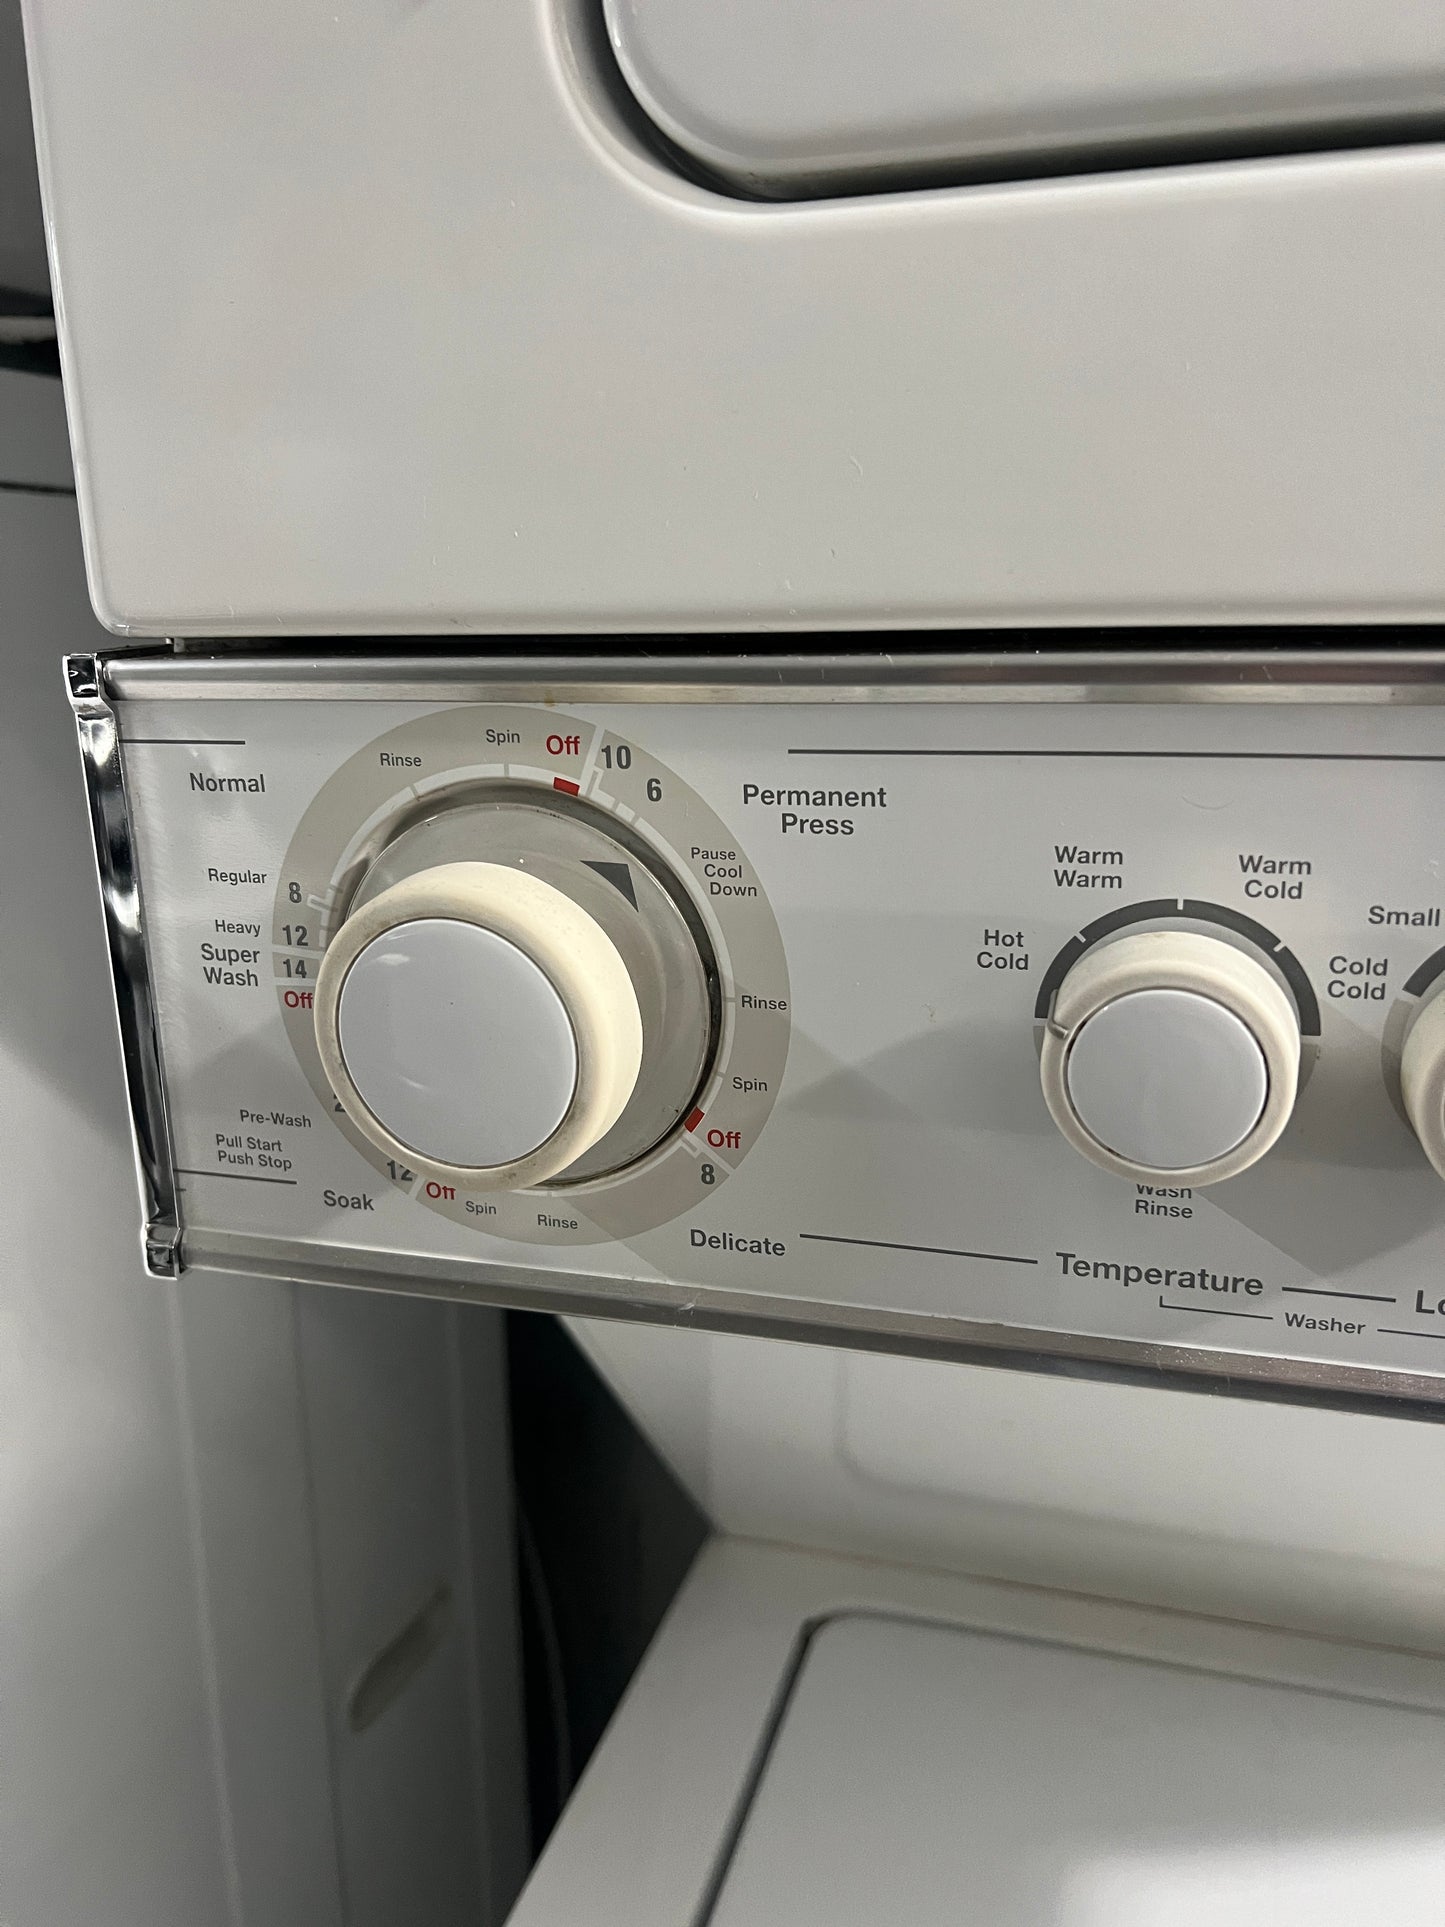 Whirlpool 24 Electric Laundry Center In White, LTE5243DQ3, 999645